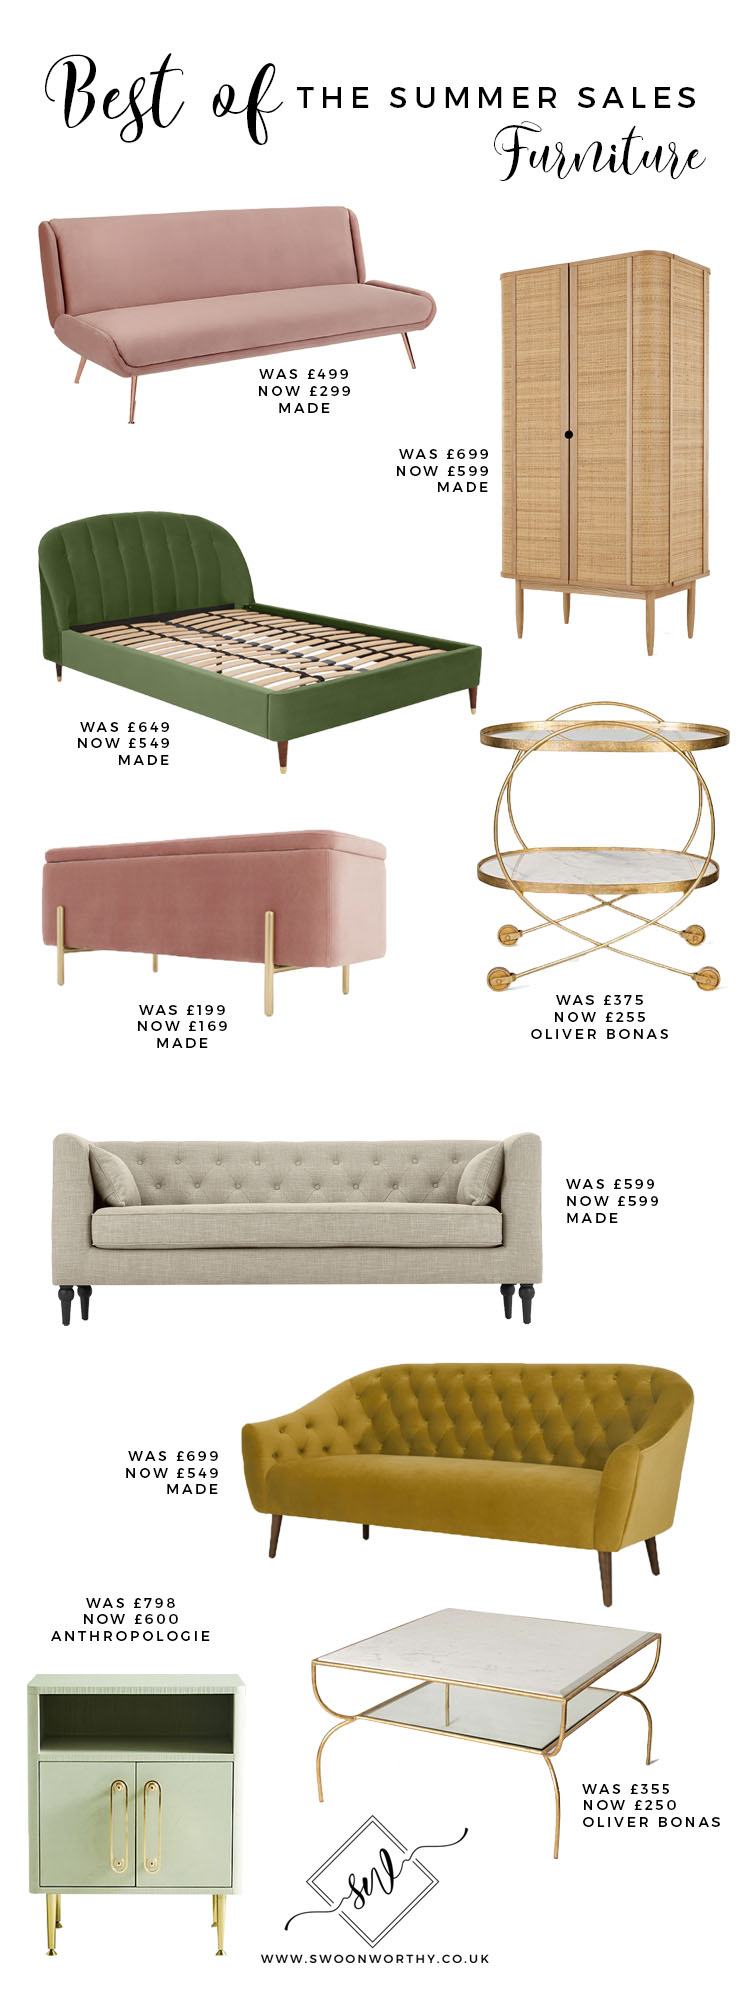 Best of the Summer Sales Furniture